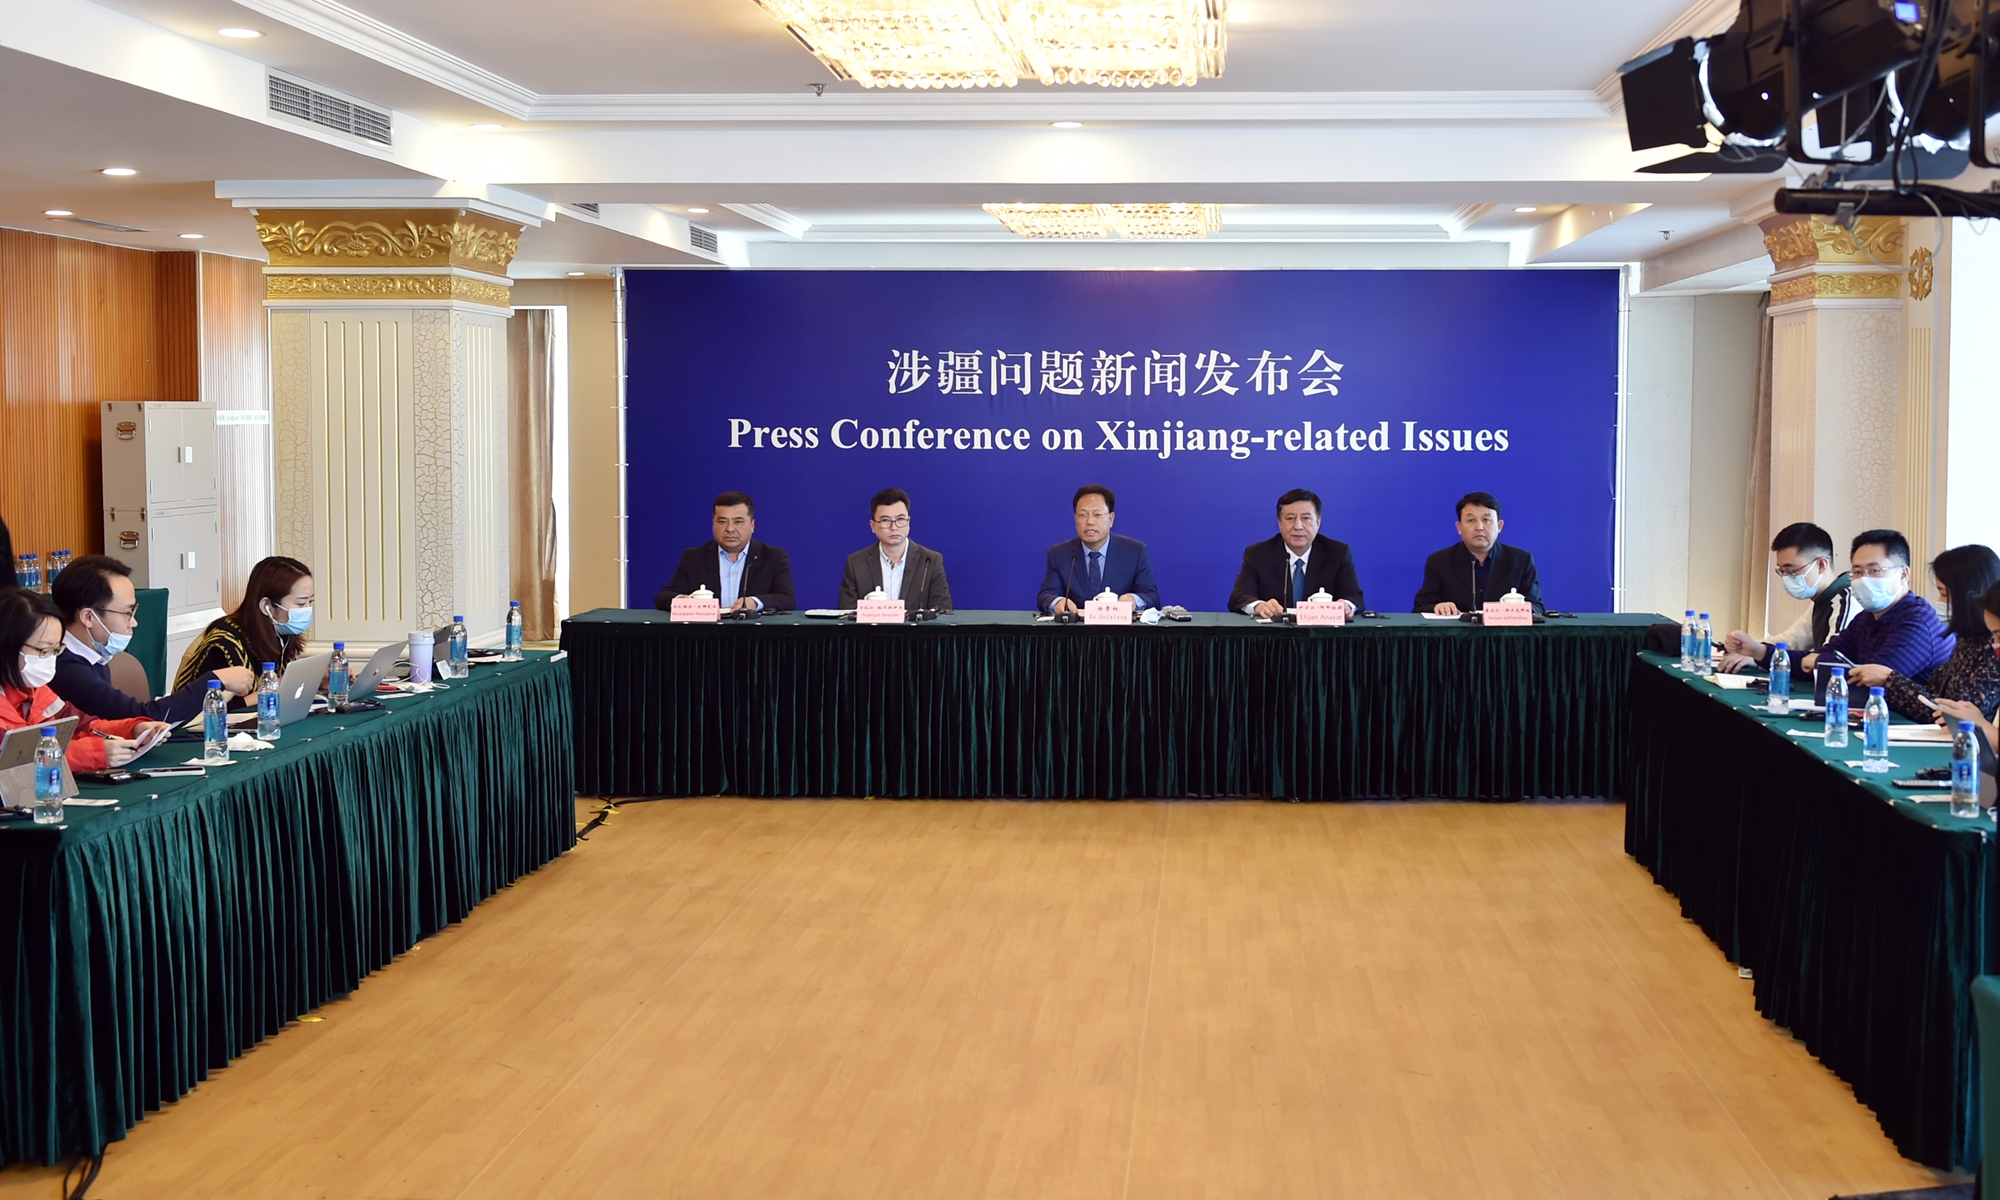 A press conference on Xinjiang-related issues is held on December 6, 2021 in Beijing. Photo: Liu Xin/Global Times 